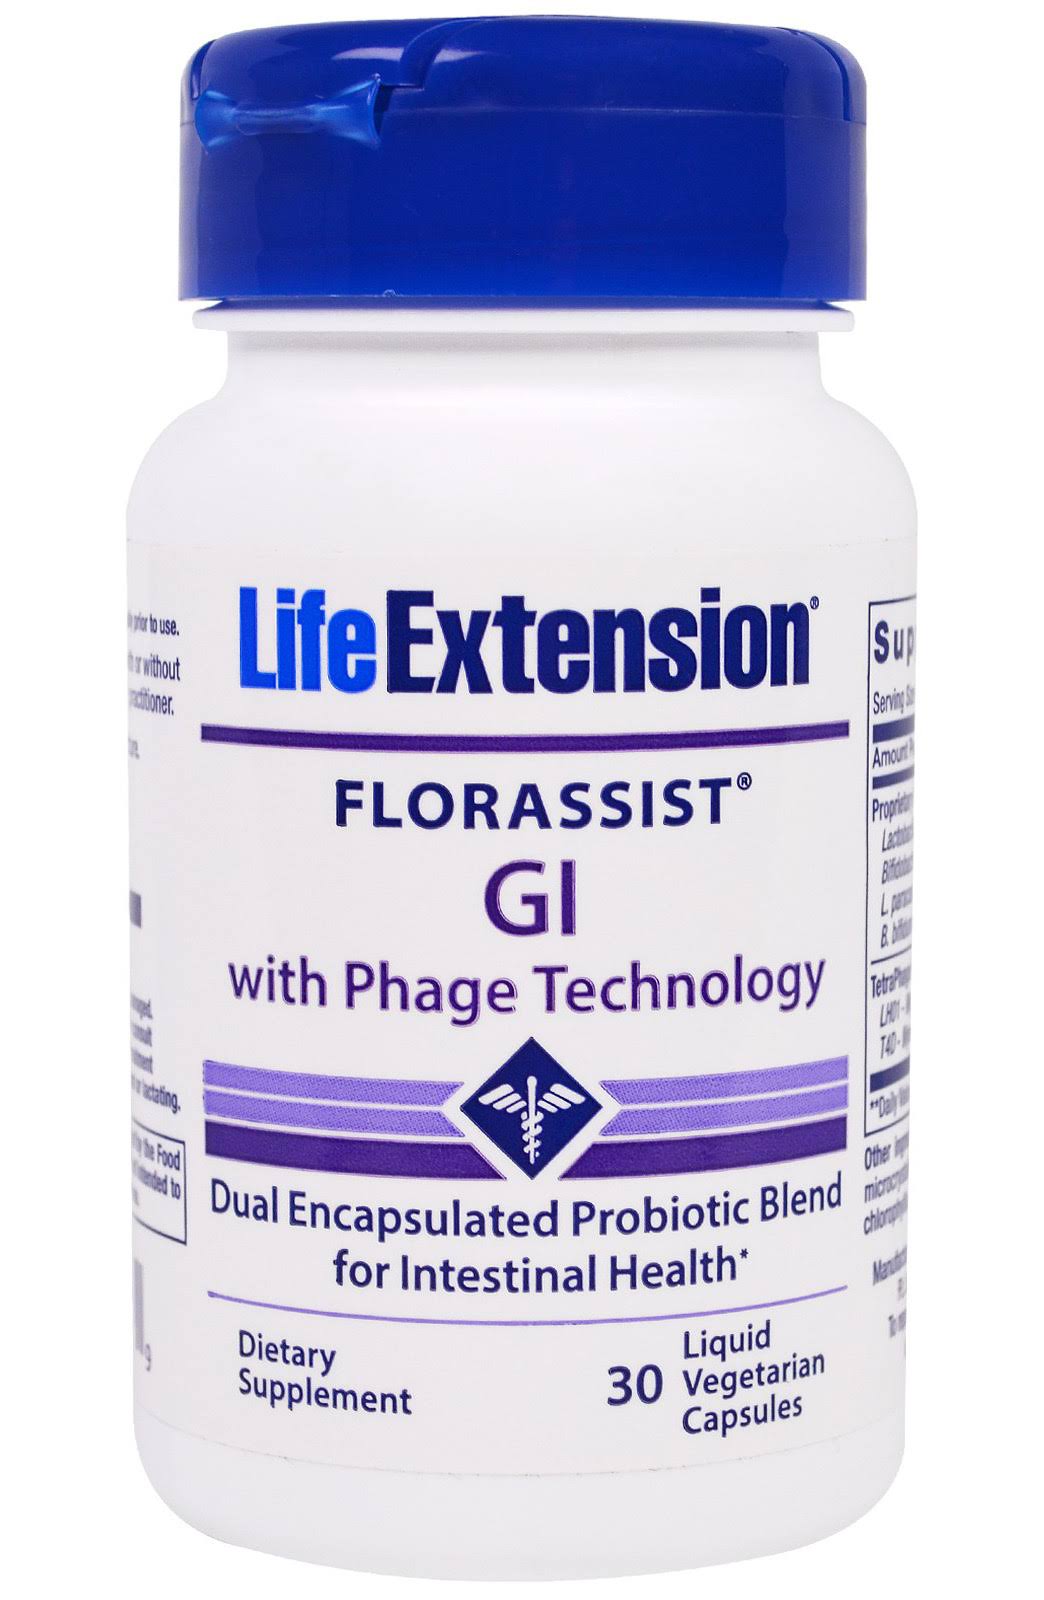 Florassist Gi with Phage Technology, 30 Liquid Capsules, Life Extension